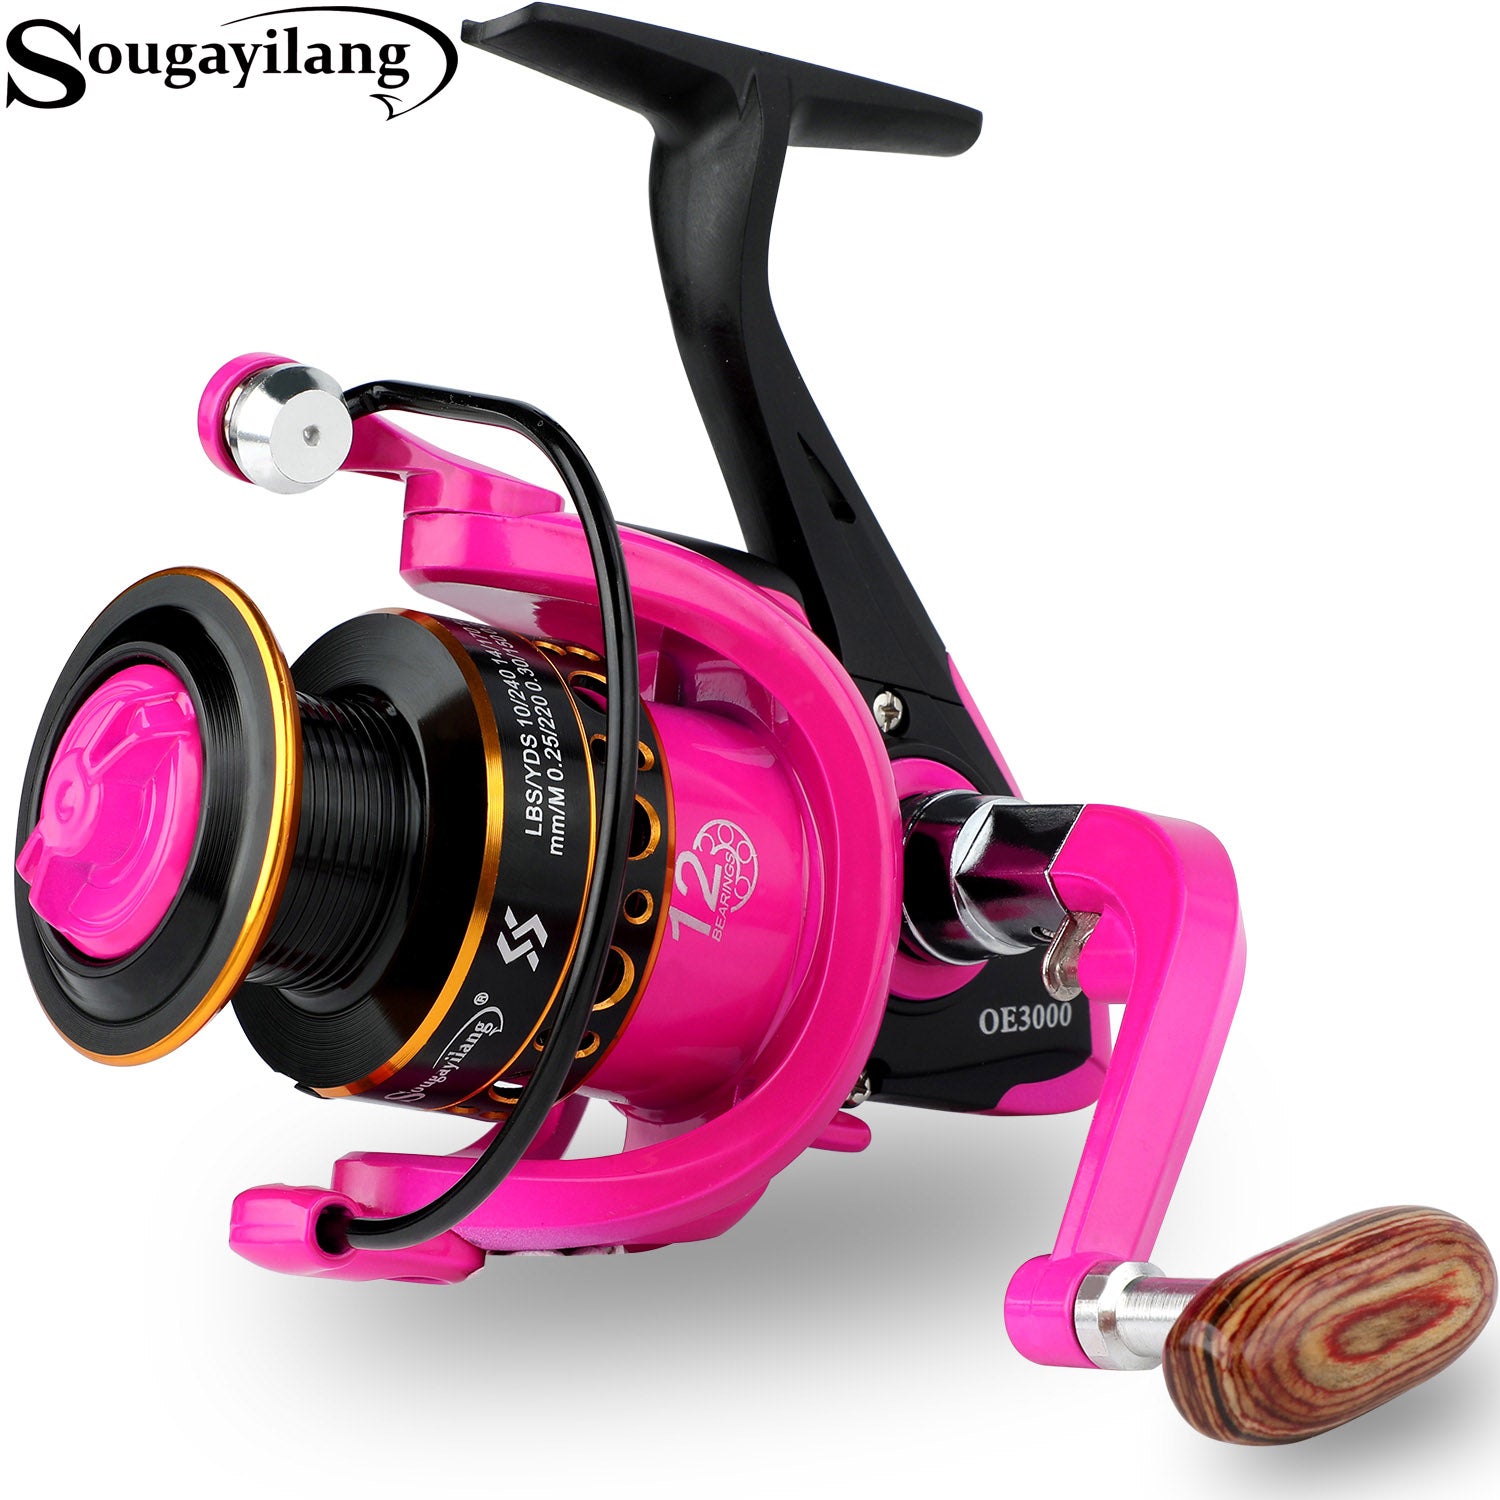 Sougayilang Spinning Fishing Reels with Left/Right Interchangeable Co